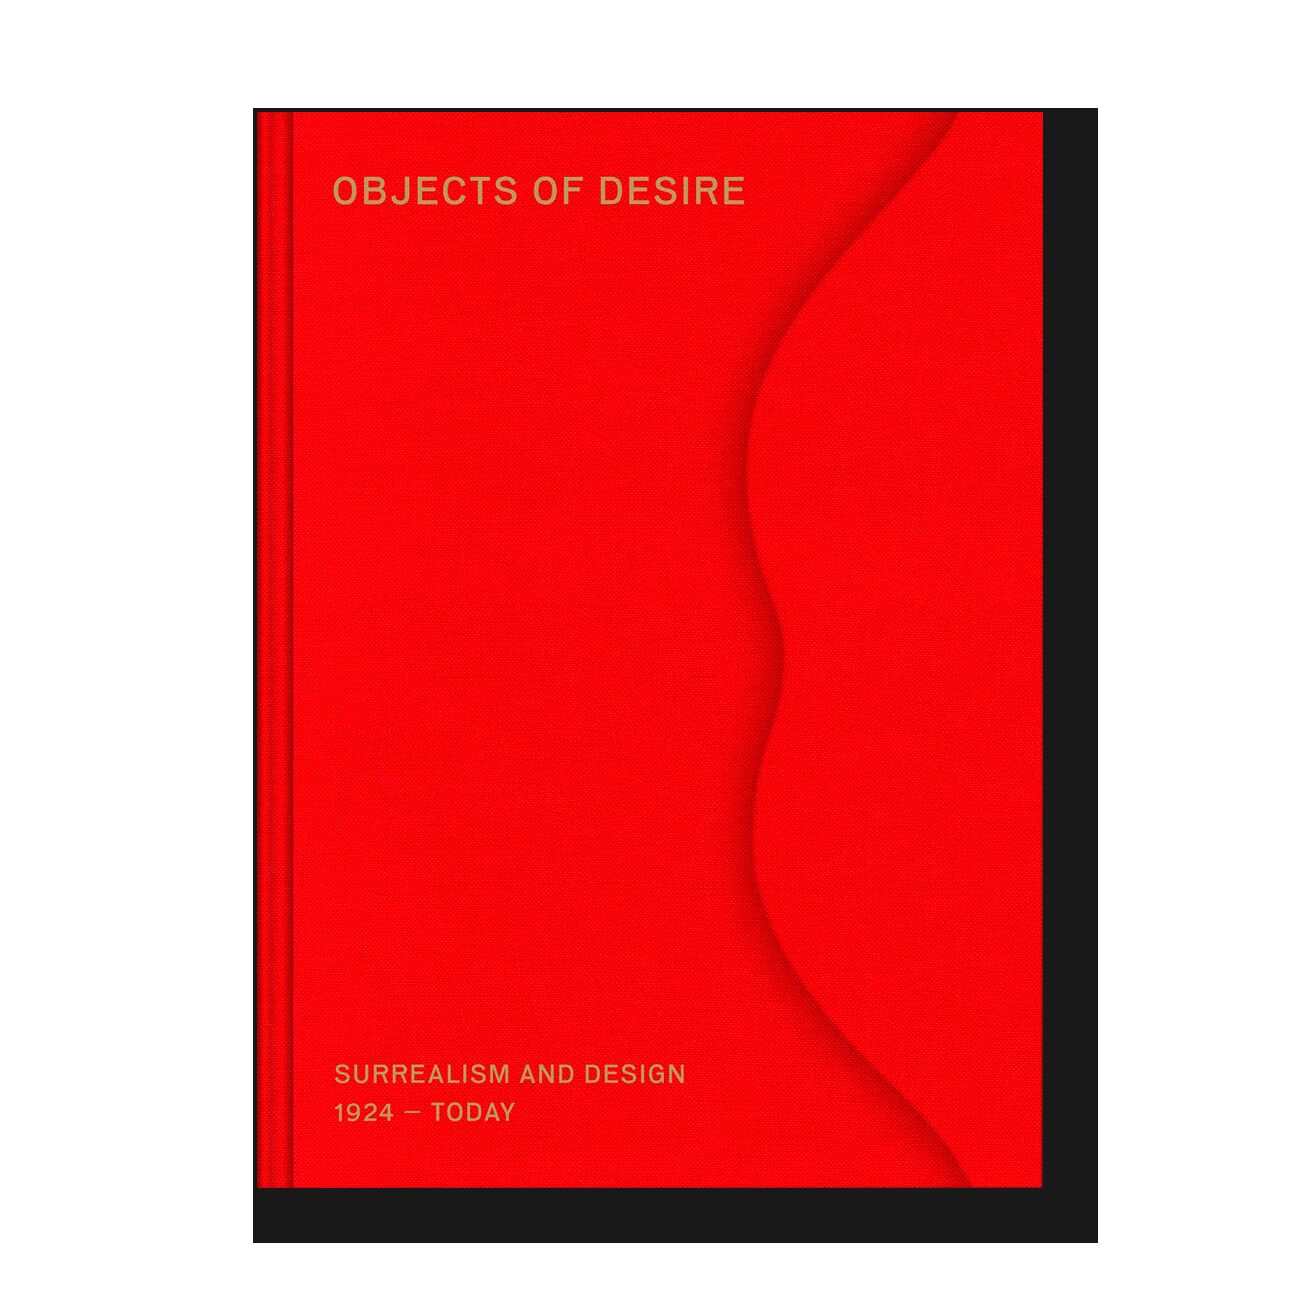 Objects of Desire: Surrealism and Design 1924 - Today